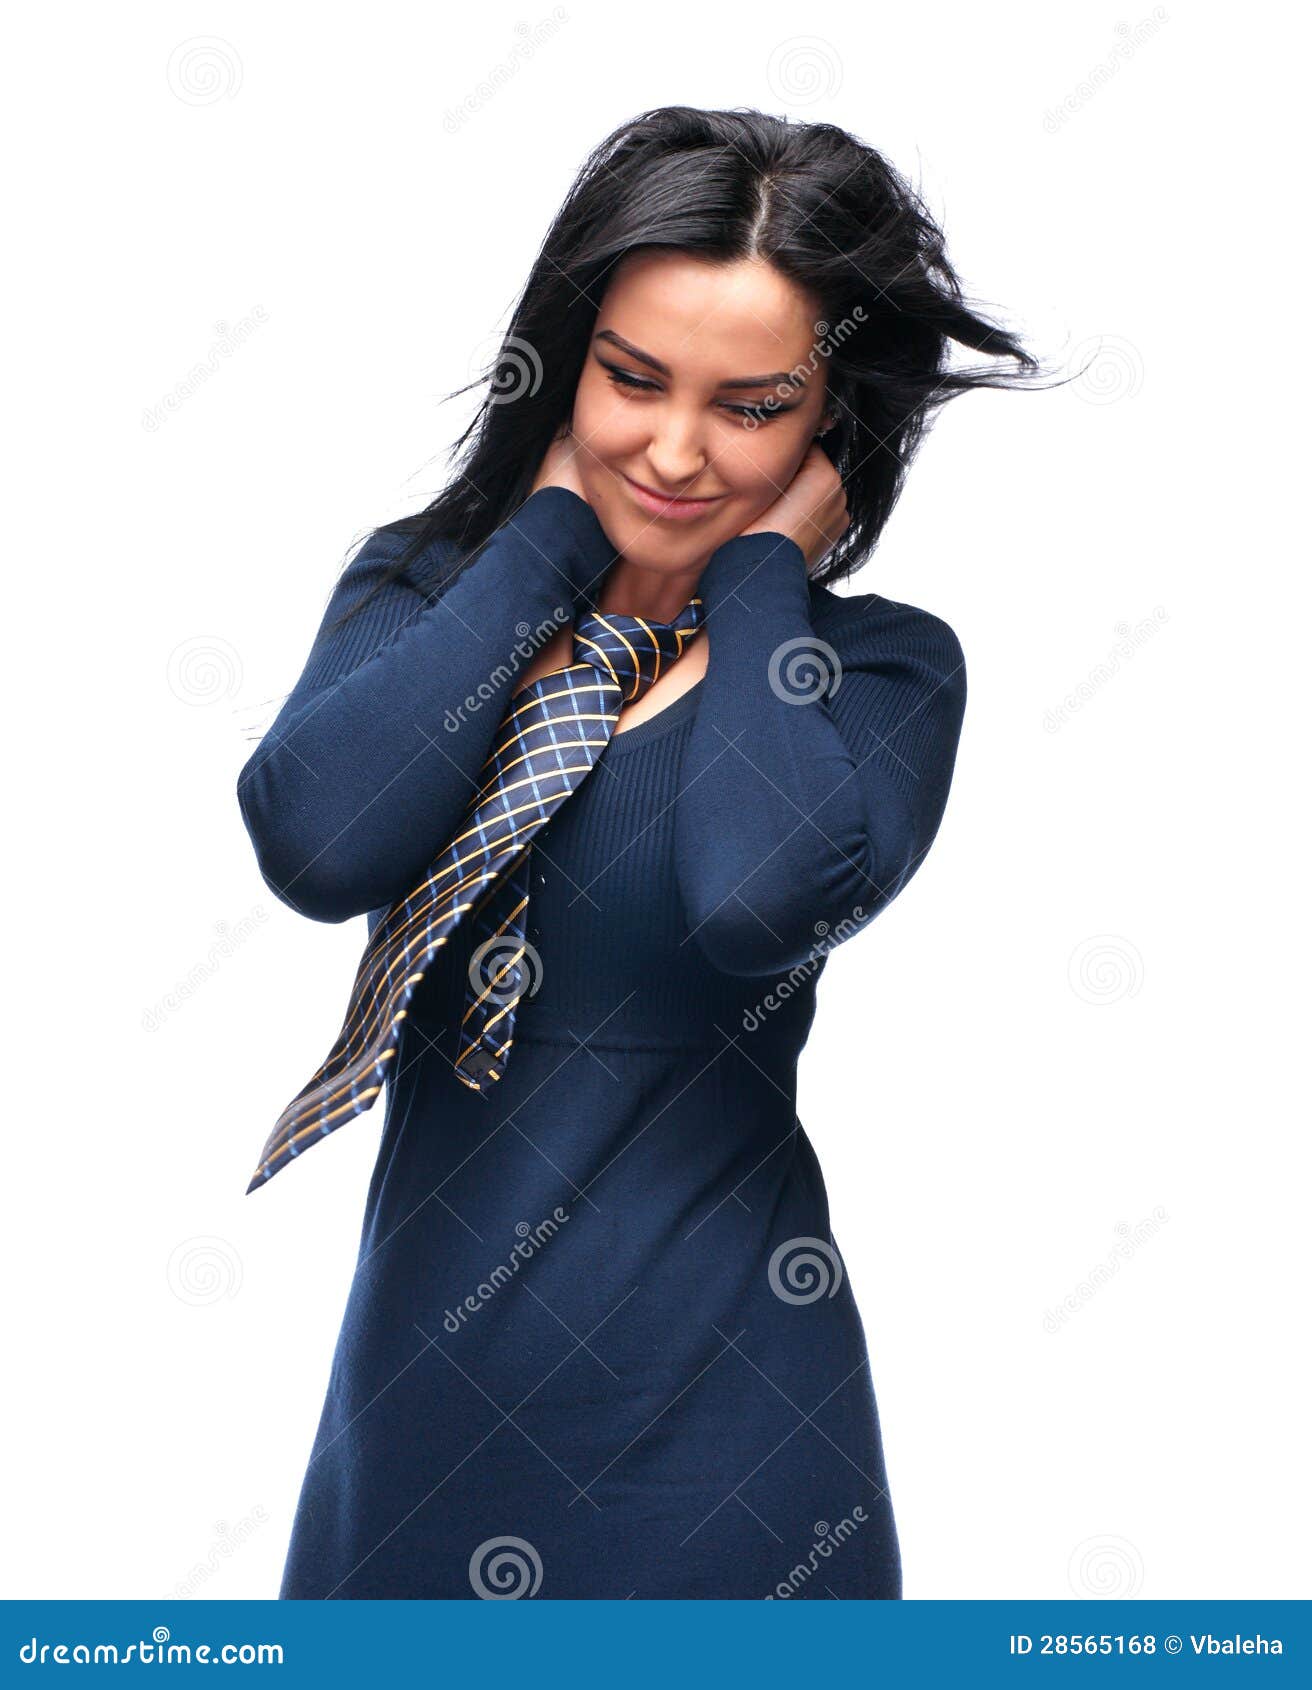 Girl with a tie stock photo. Image of enjoy, beautiful - 28565168